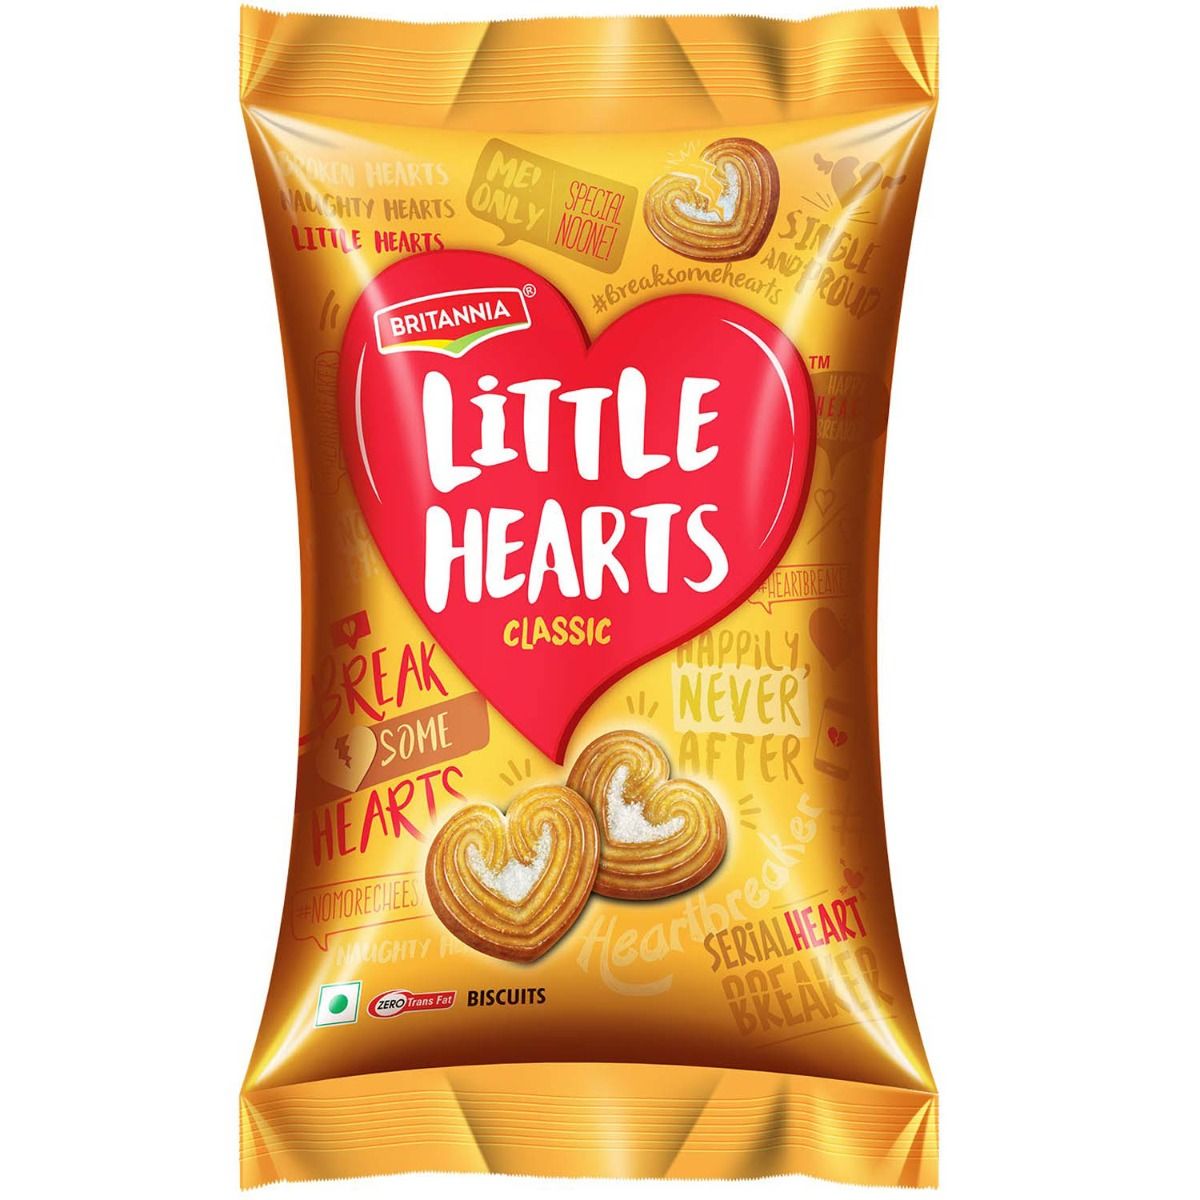 Britannia Little Hearts Biscuits, 75 gm, Pack of 1 